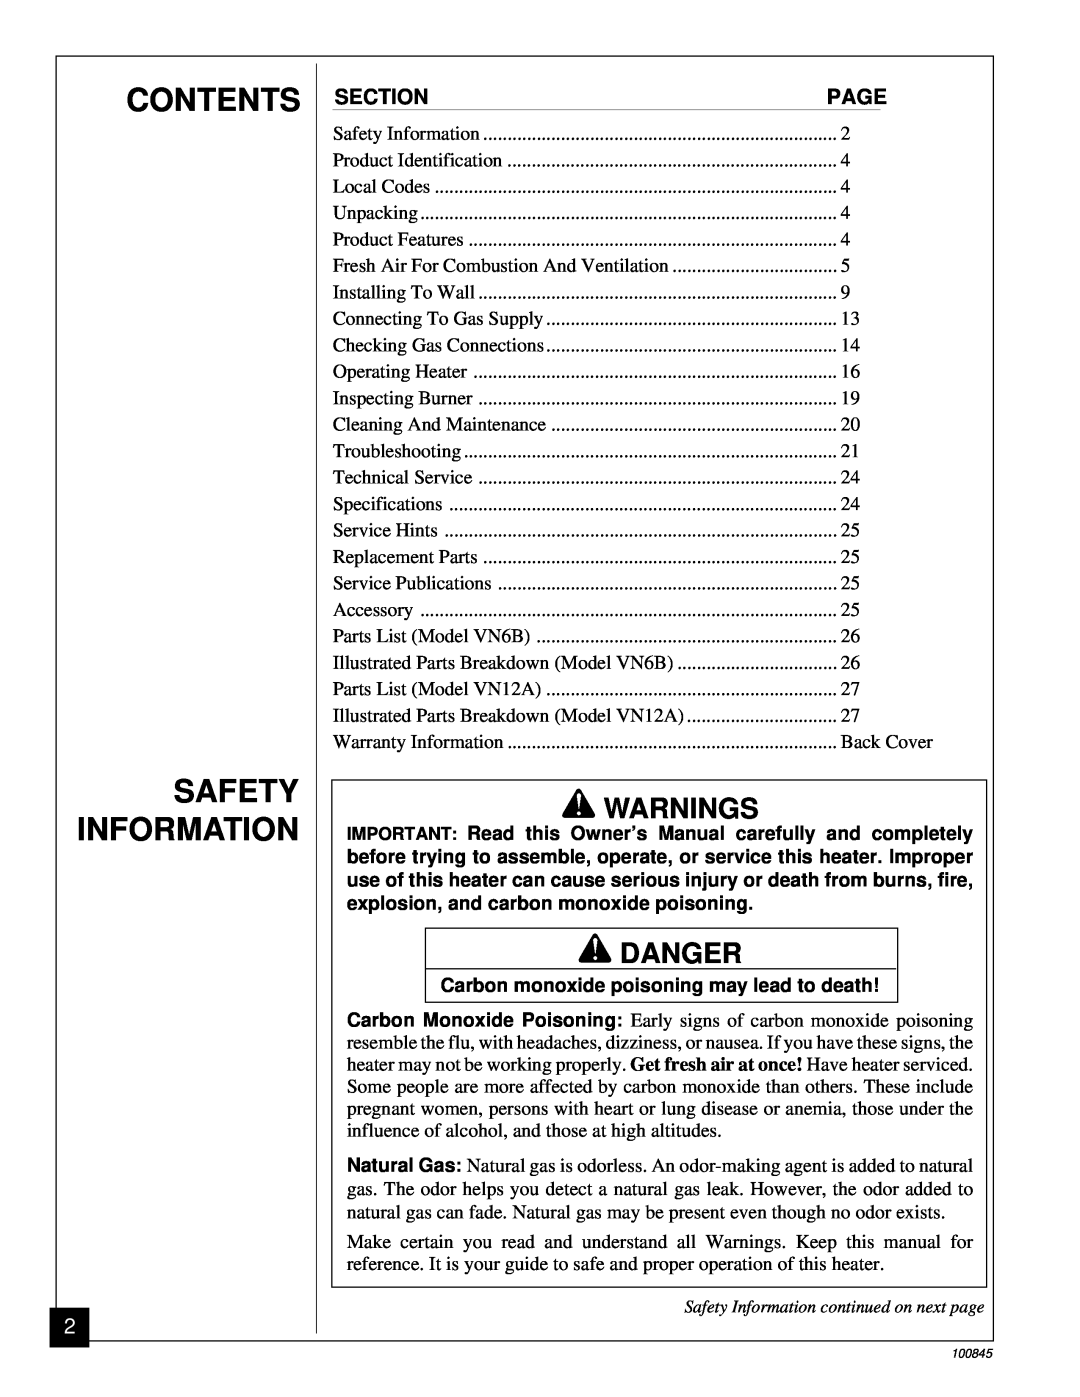 Vanguard Heating VN12A, VN6B installation manual Contents Safety Information, Warnings, Danger 